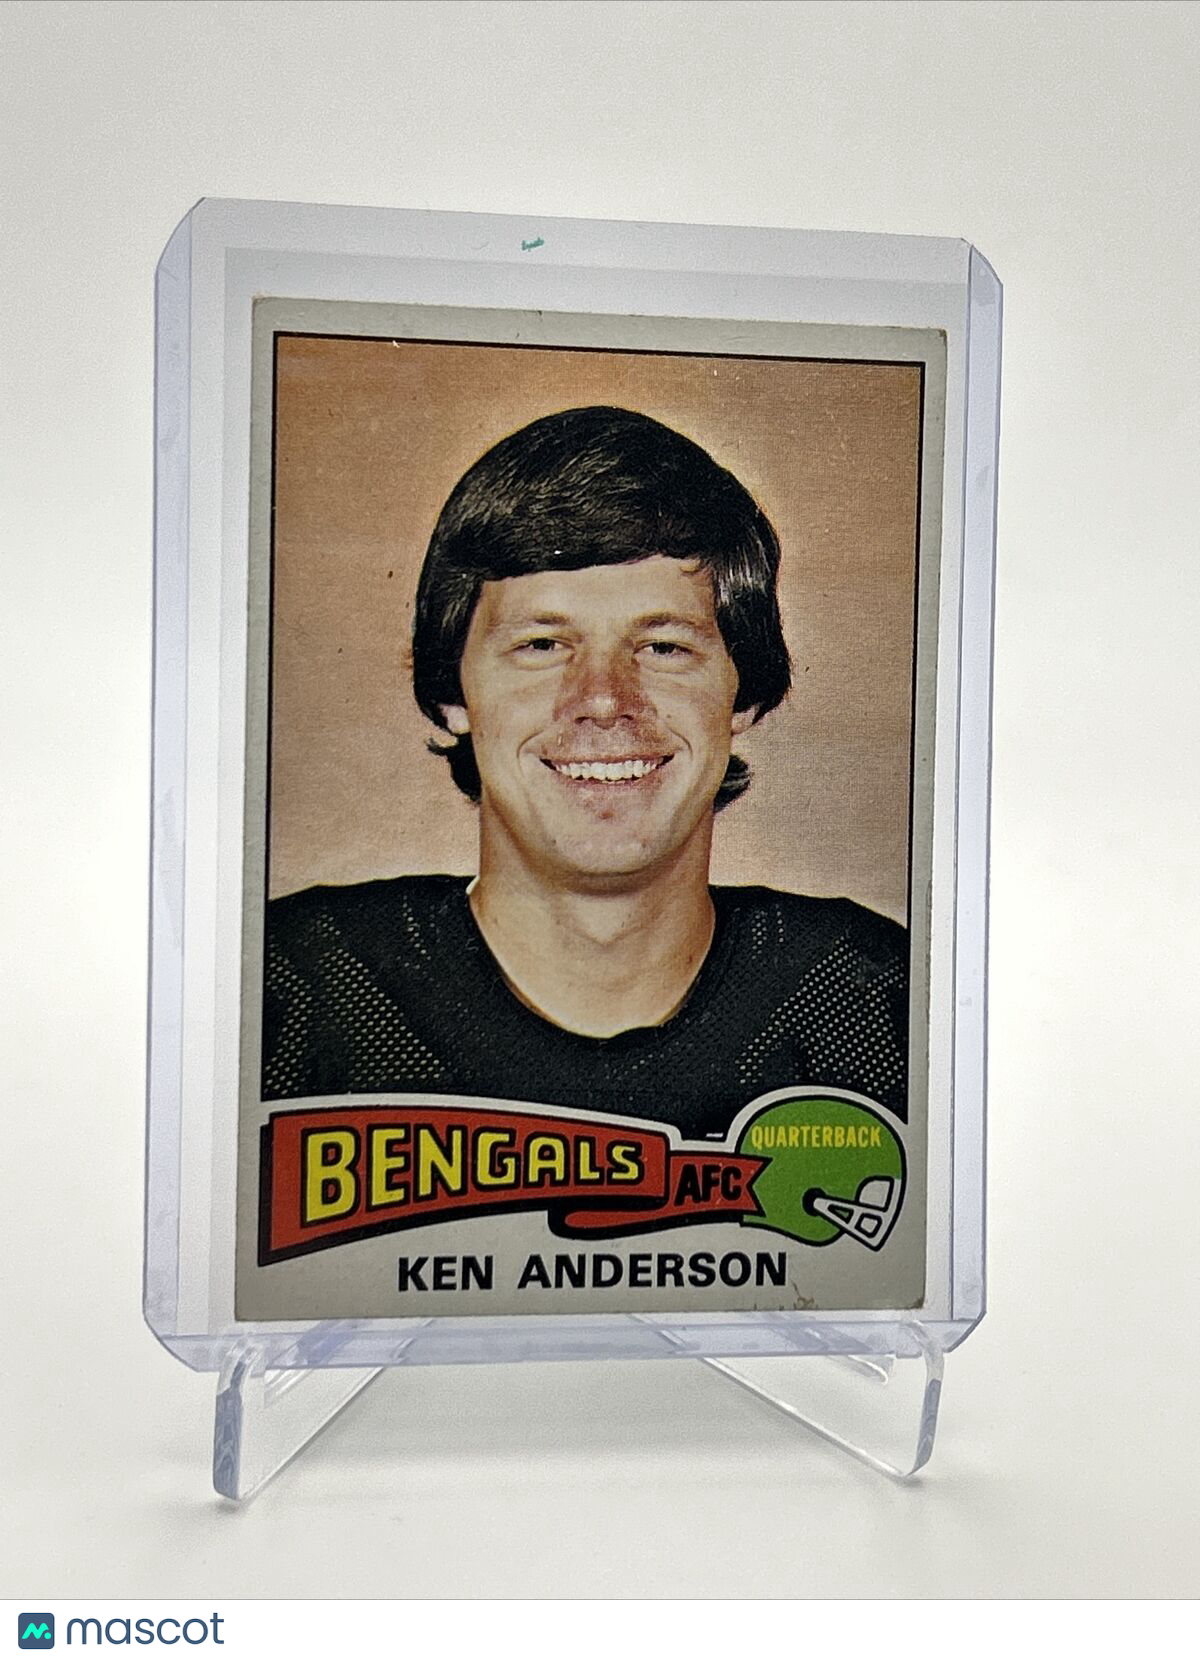 1975 Topps Ken Anderson Football Card #160 VG Quality FREE SHIPPING